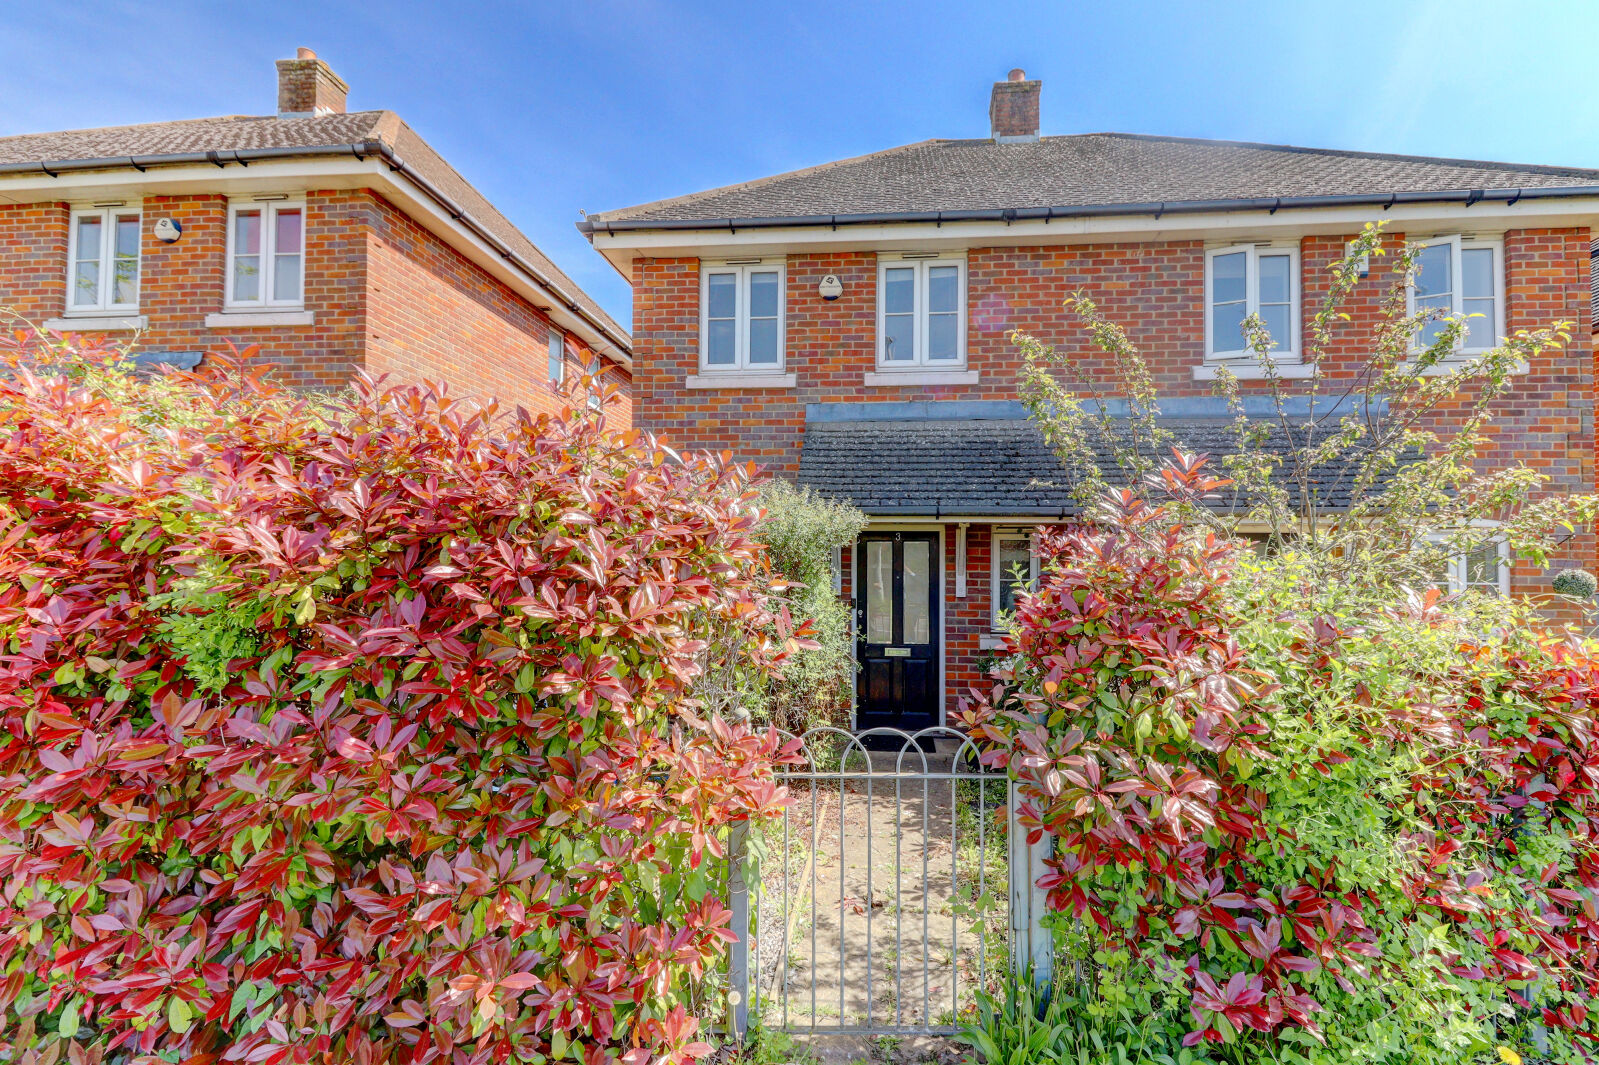 2 bedroom semi detached house for sale John Hall Way, High Wycombe, HP12, main image